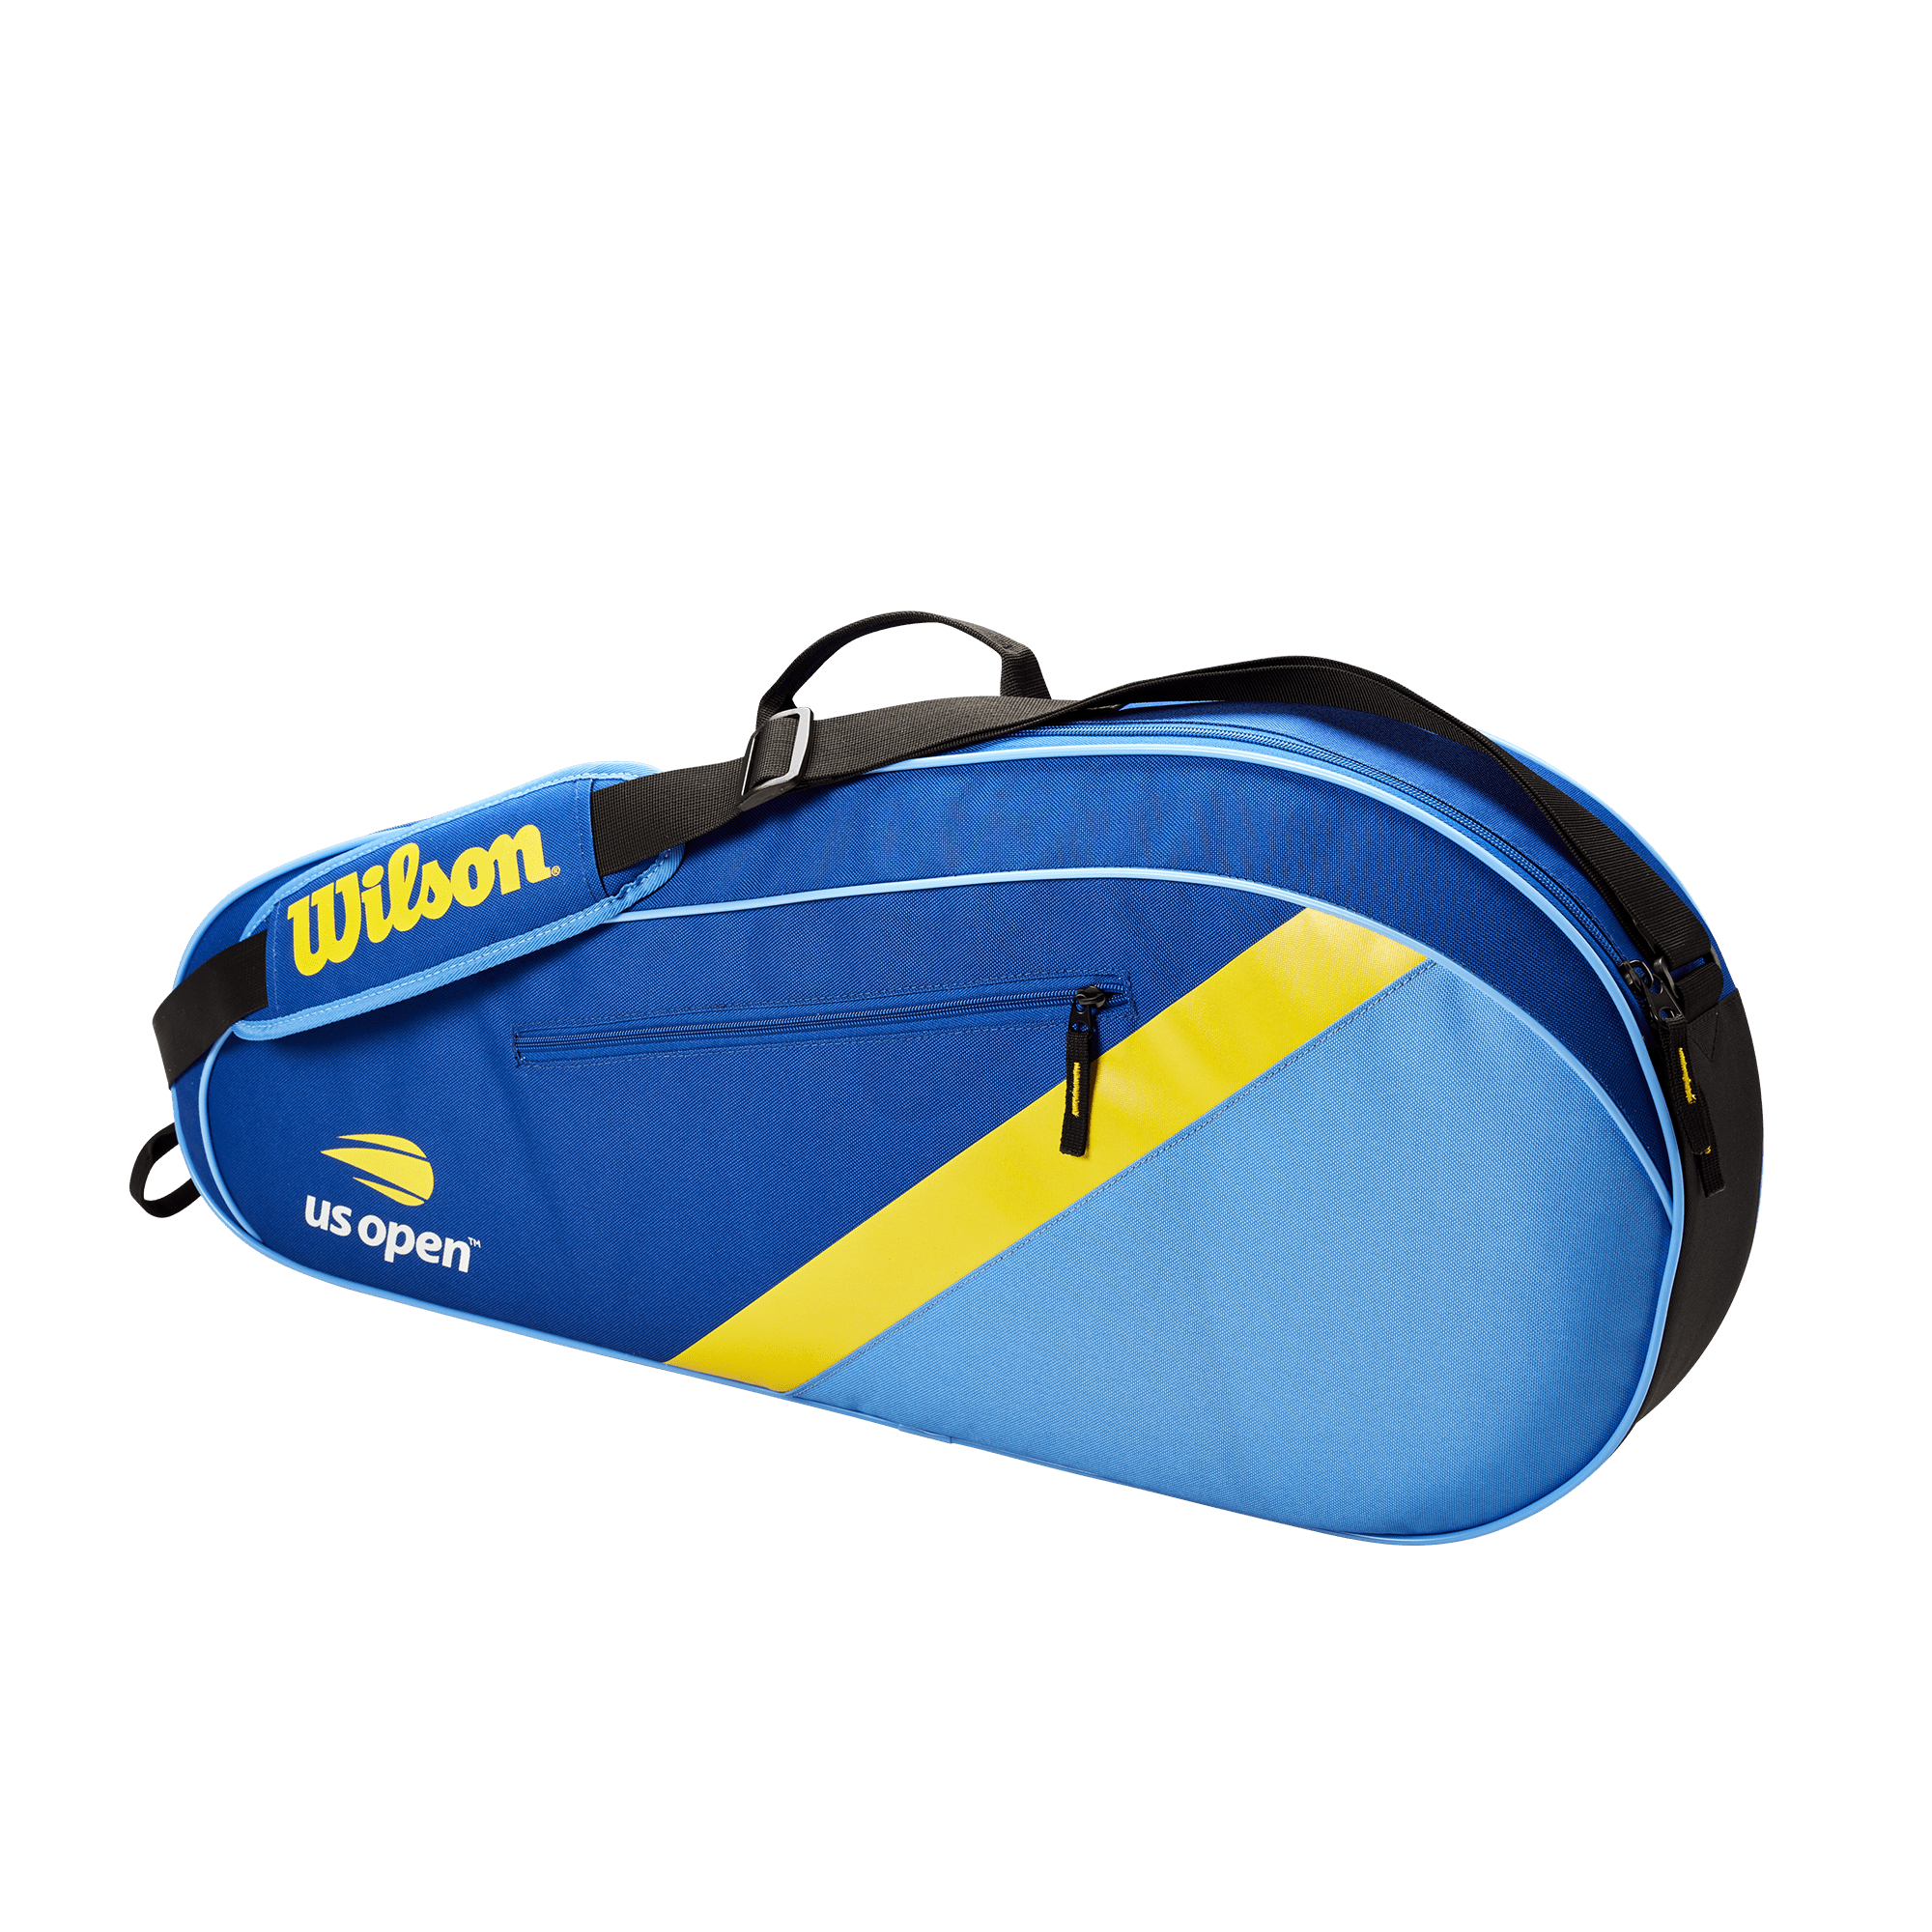 Wilson Tennis Equipment Bag Holds up to 3 Rackets for sale online 